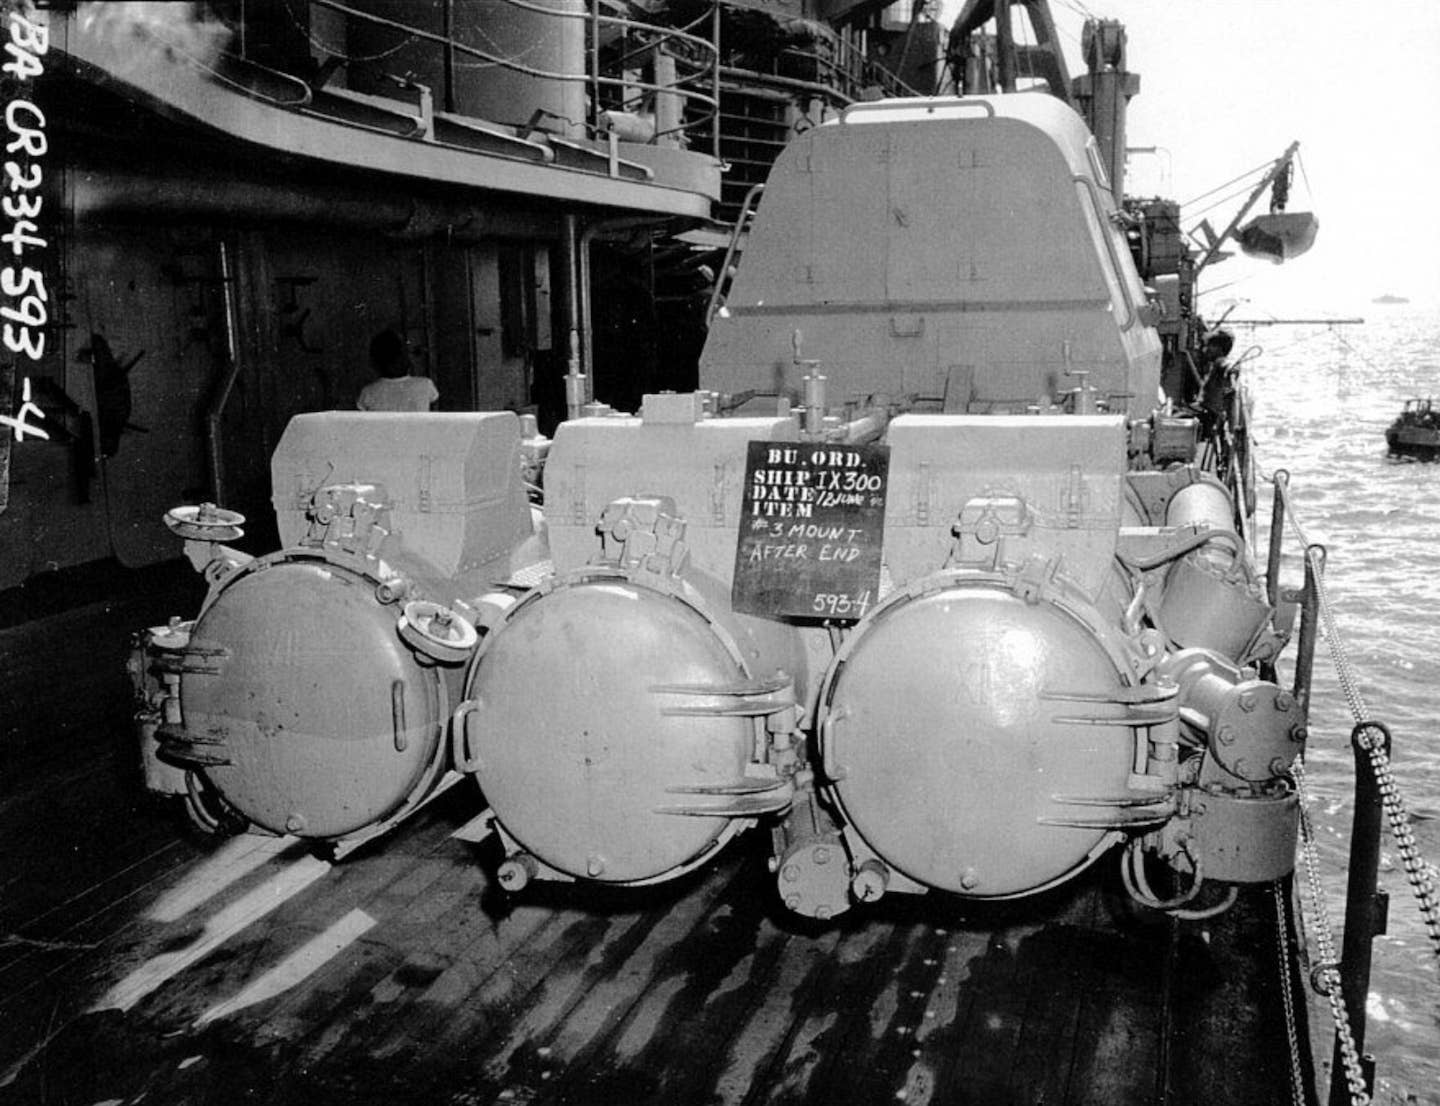 A rear view of number three mount. The operator entry hatch can be seen towards the back of the enclosed firing station. <em>U.S. Navy photo</em>